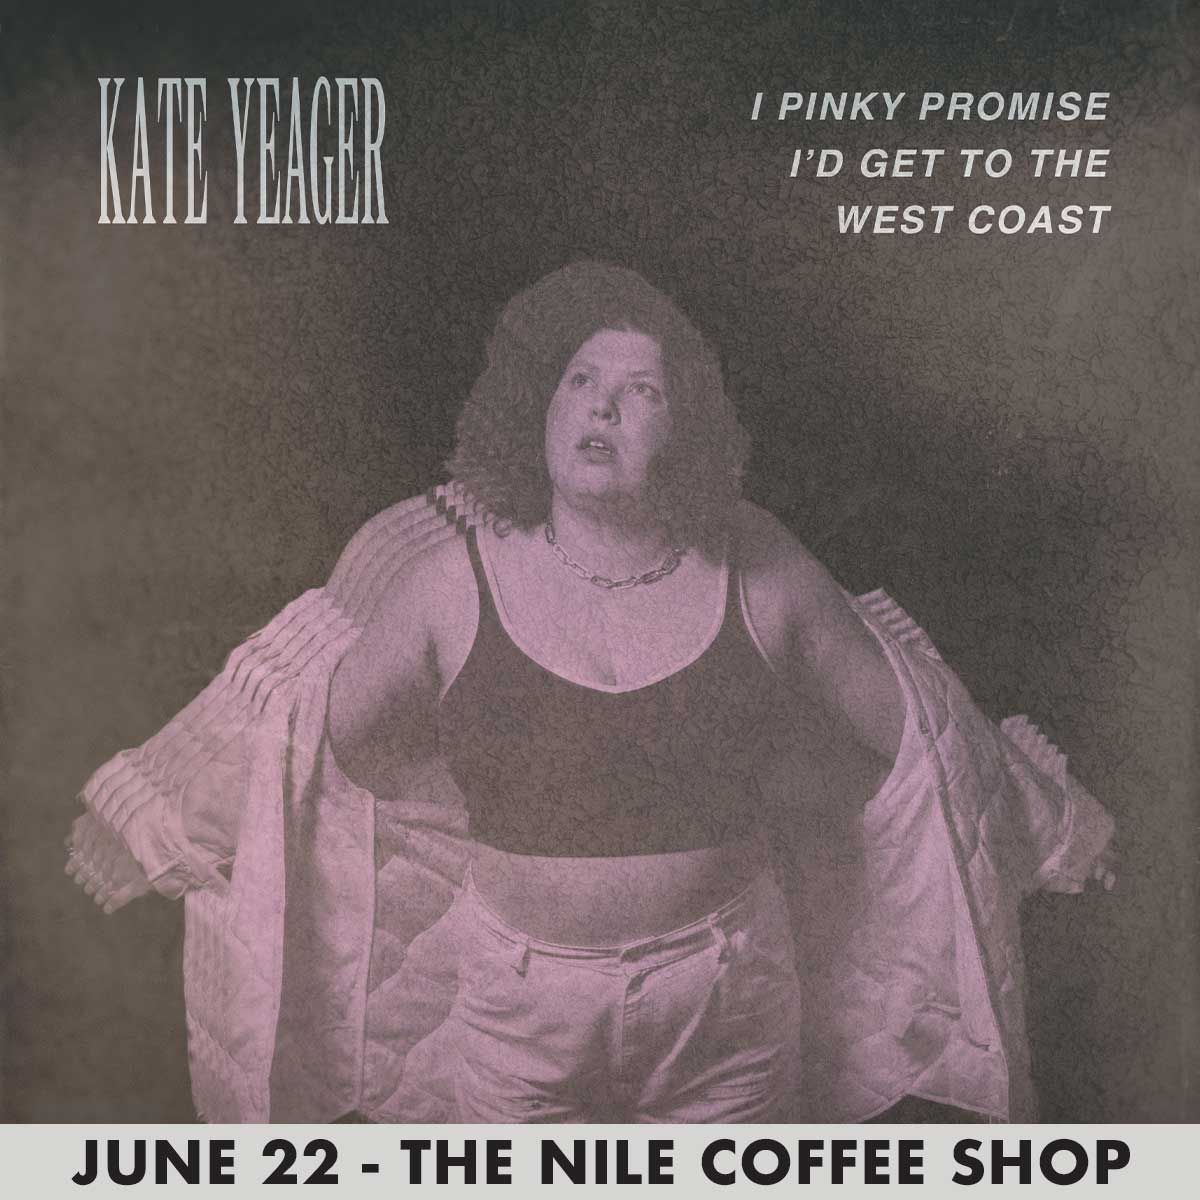 KATE YEAGER at The Nile Coffee Shop